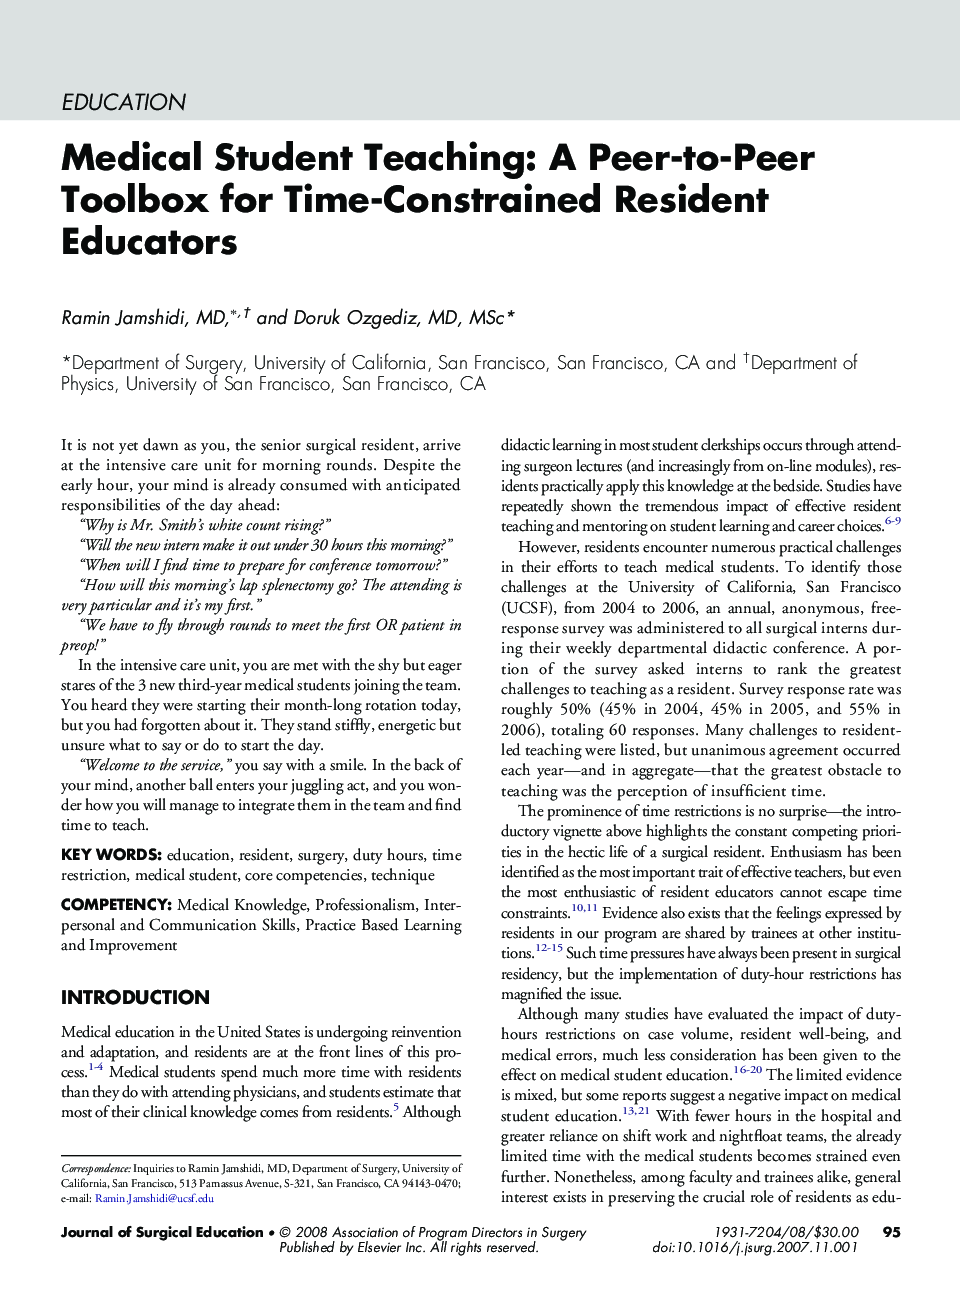 Medical Student Teaching: A Peer-to-Peer Toolbox for Time-Constrained Resident Educators